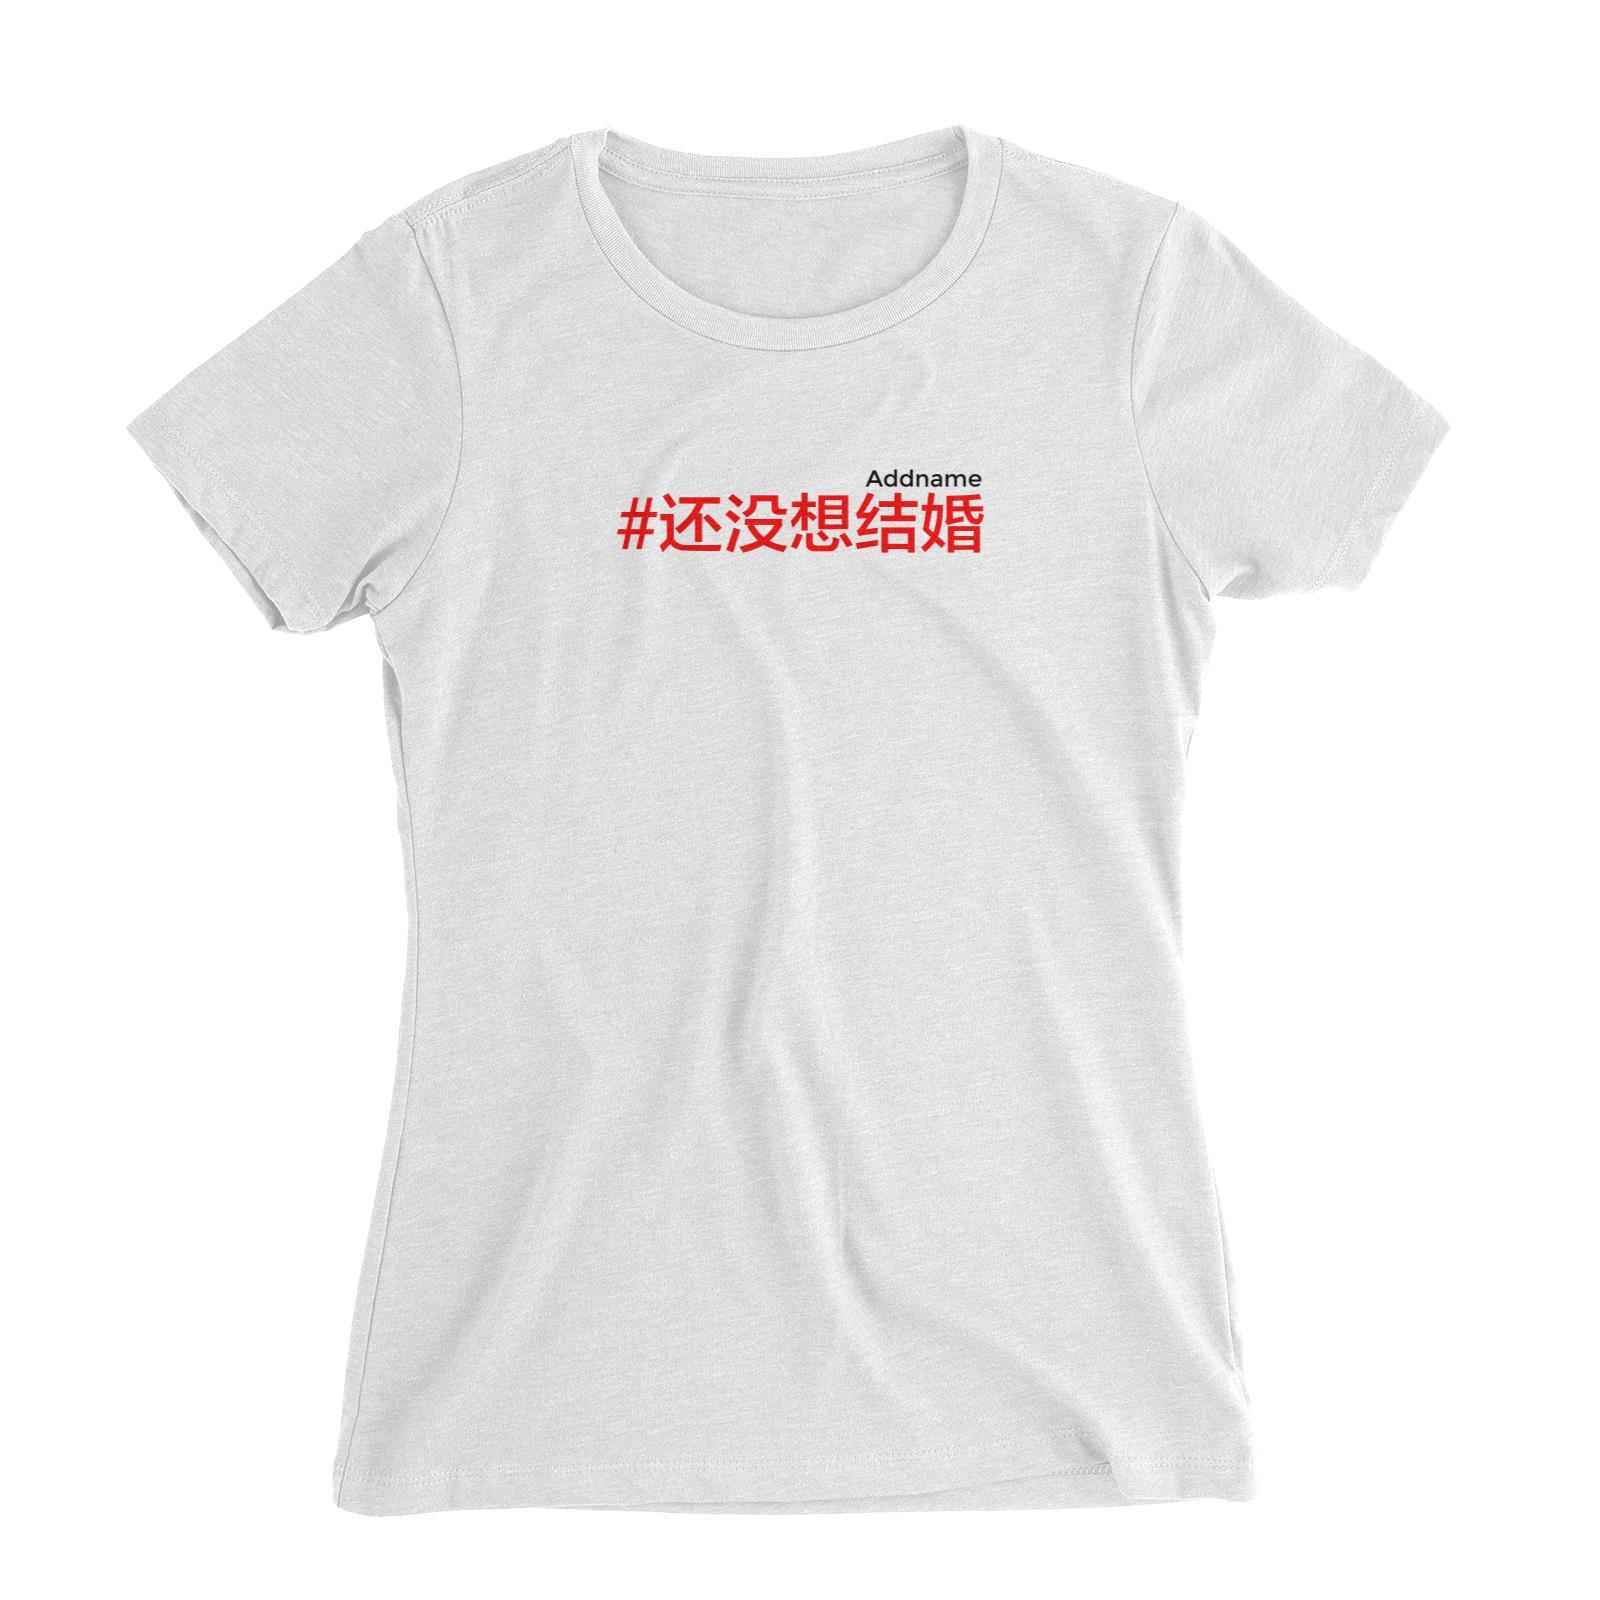 Chinese New Year Hashtag Still Not Getting Married Women's Slim Fit T-Shirt  Personalizable Designs Funny